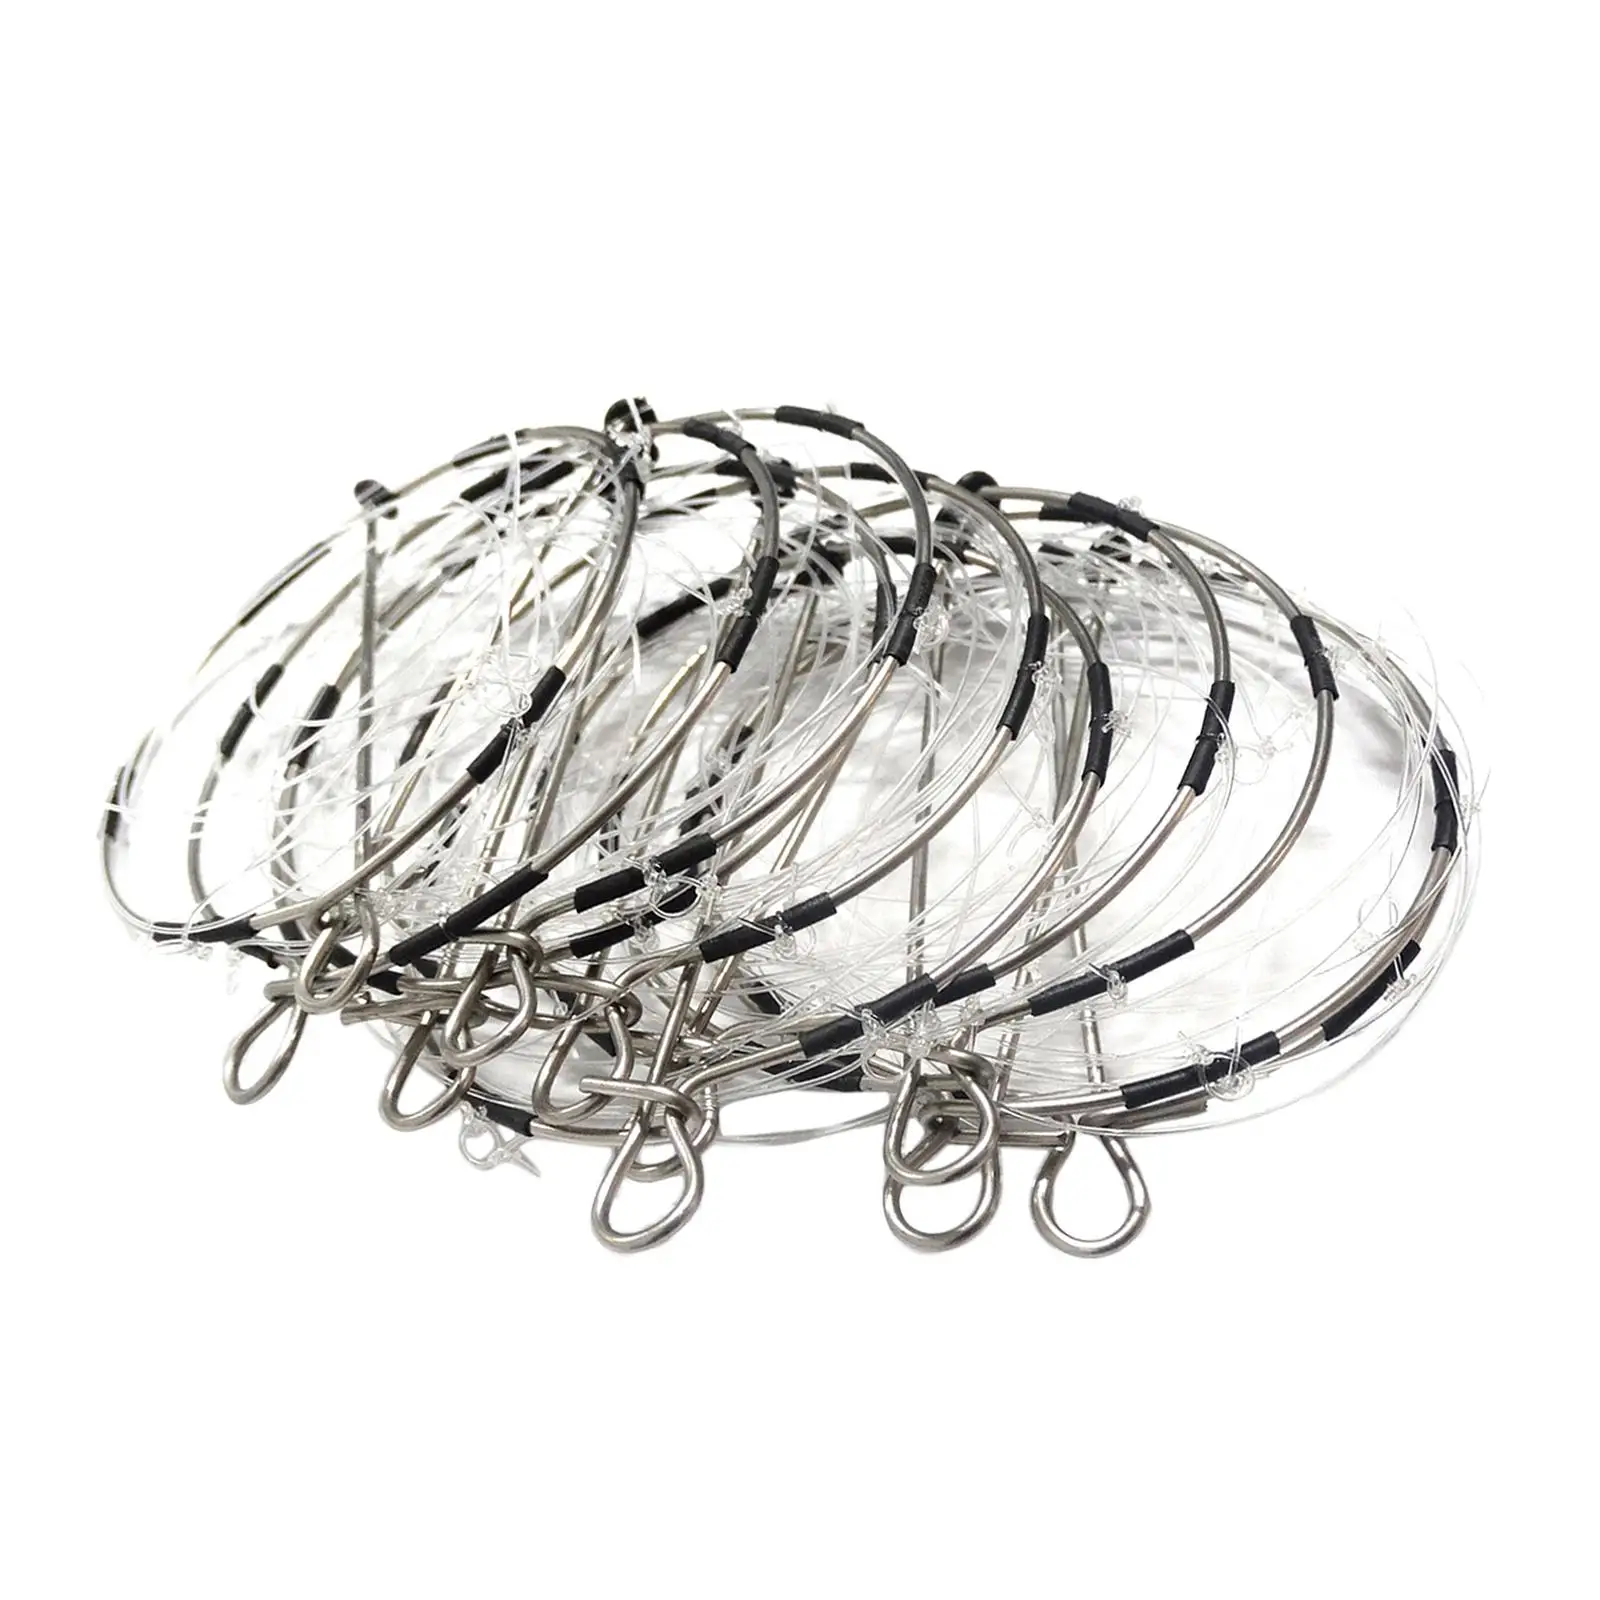 10x Crab Cast Trap Six Movable Buckles Cast Dip Cage Collapsible Catch Crabs Tool for Crawdad Prawn shrimp Crayfish Reservoirs